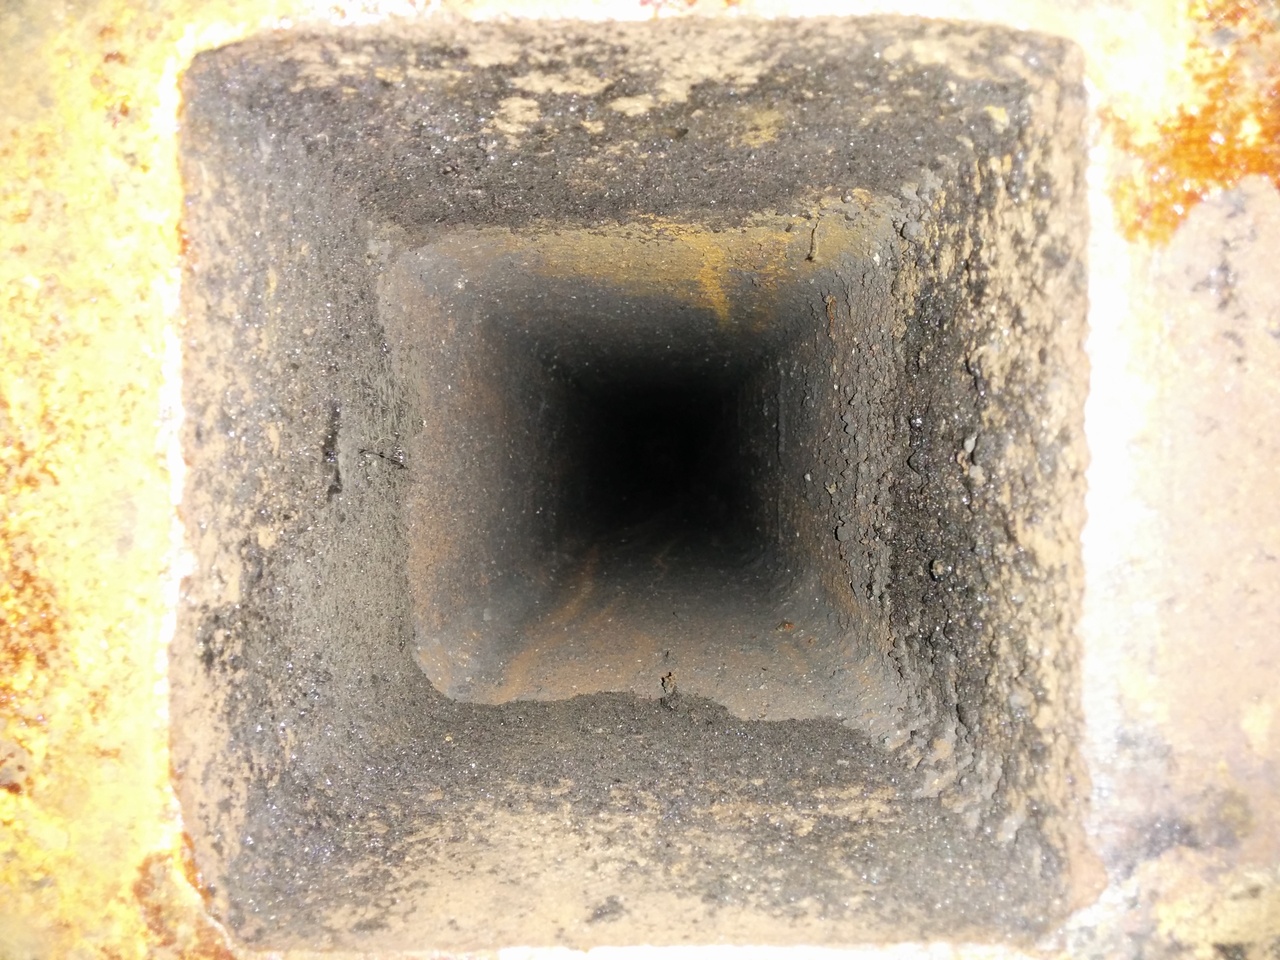 Hollow interior of the monument.